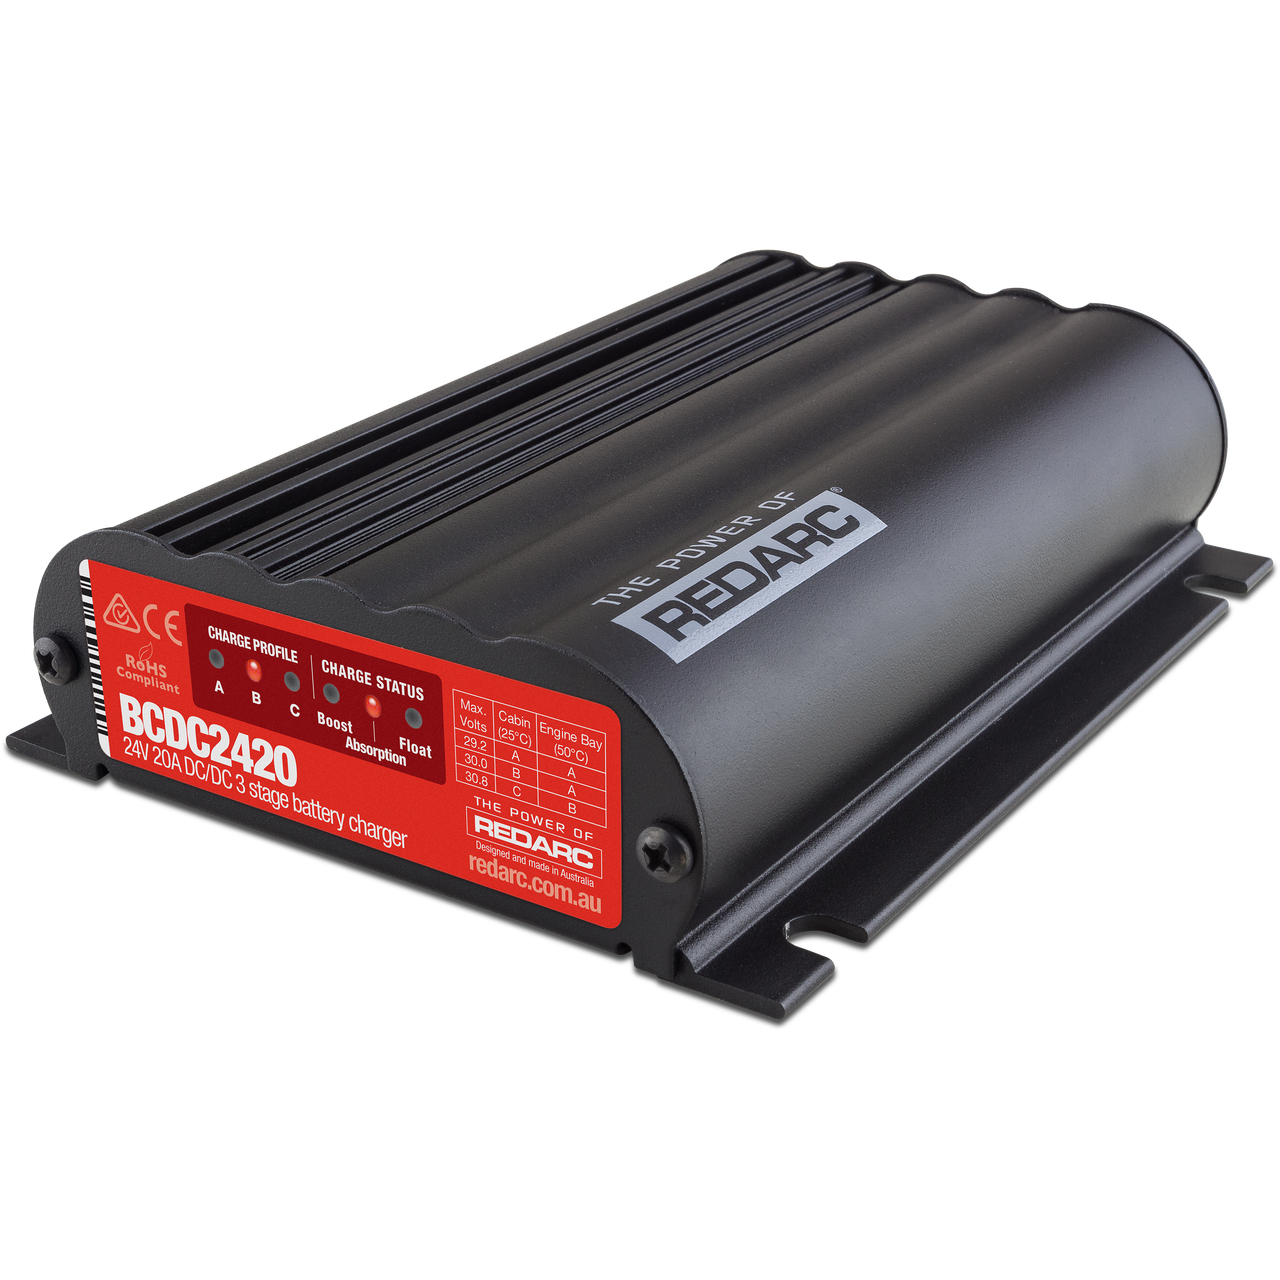 Show details for REDARC BCDC2420 24V 20A IN-VEHICLE DC BATTERY CHARGER